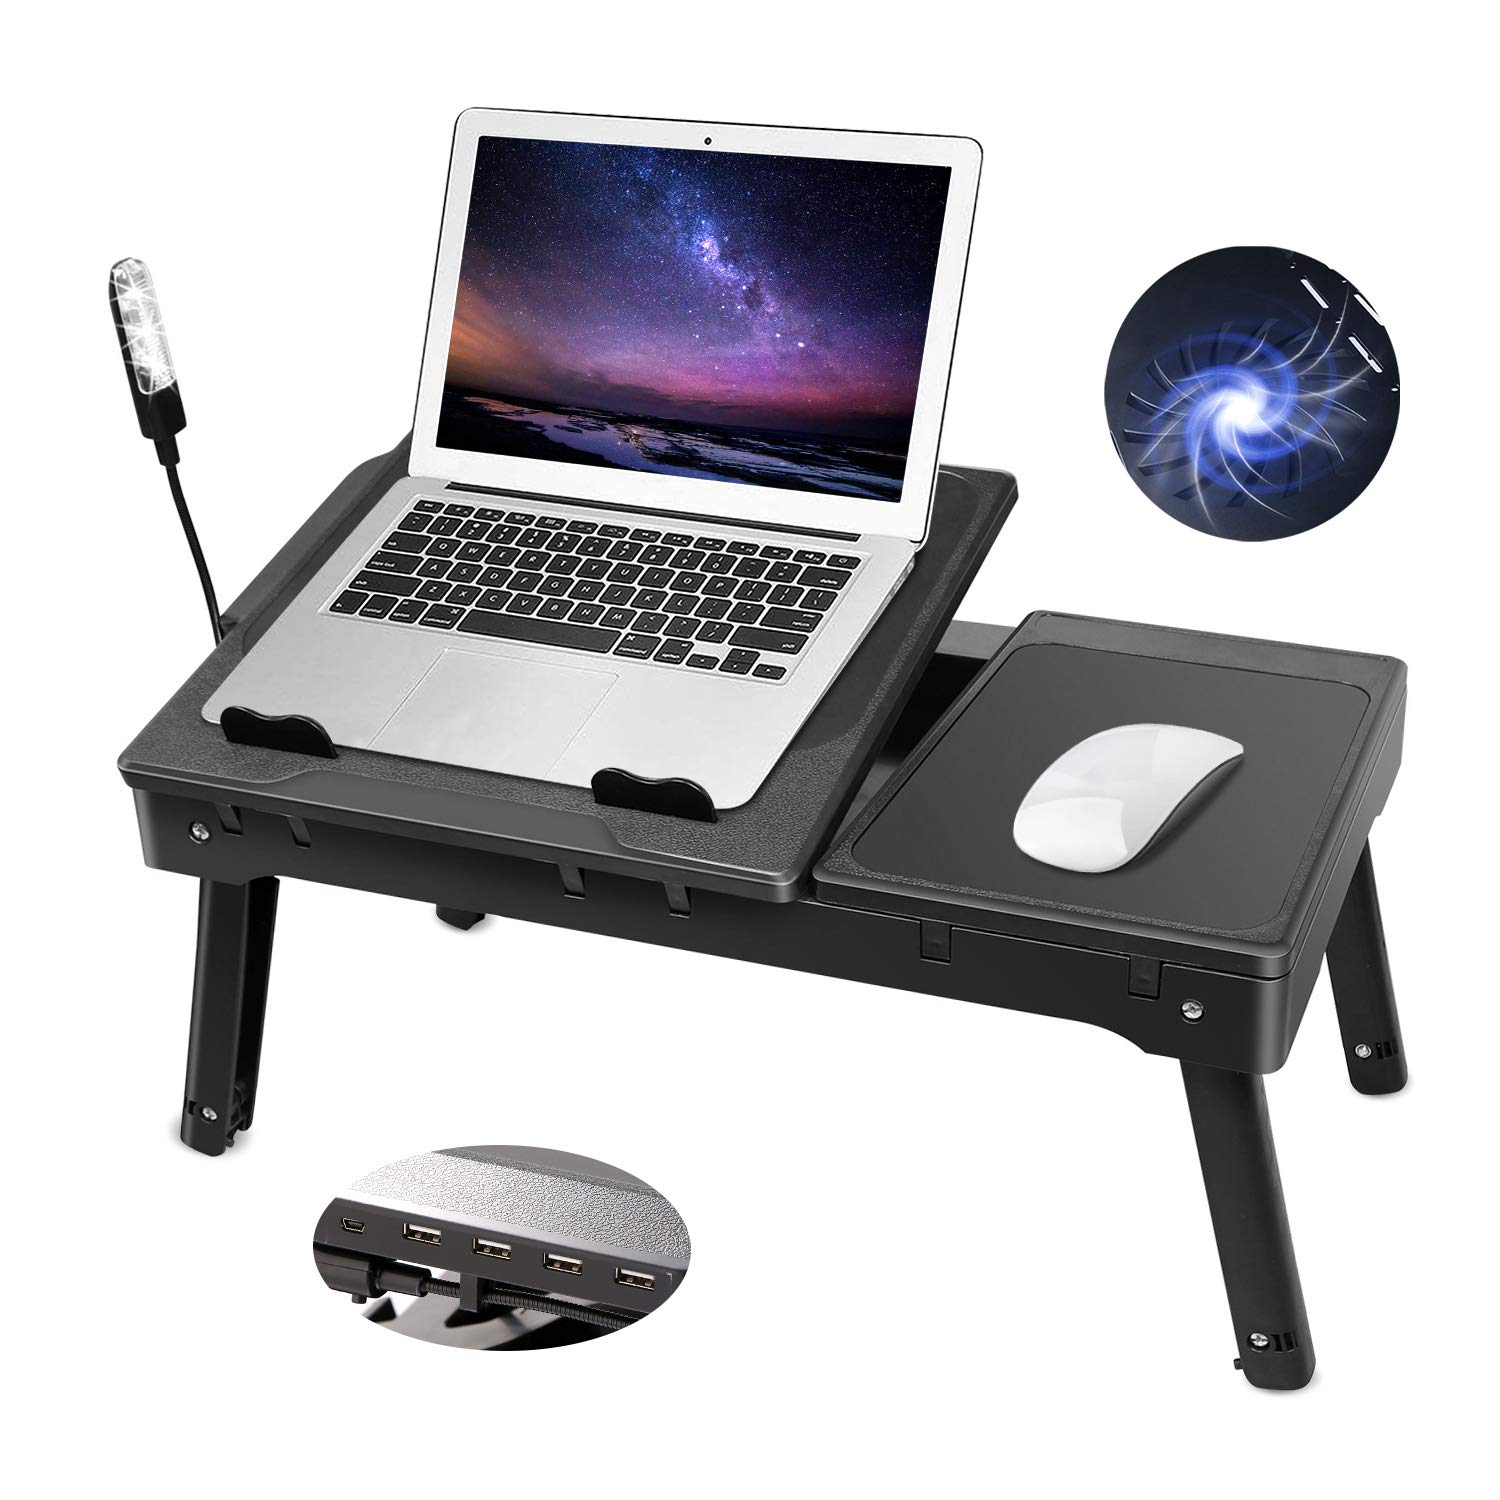 Moclever Laptop Table for Bed-Multi-Functional Laptop Bed Table Tray with Internal Cooling Fan & 2 Independent Laptop Stands-Foldable & 3 Different...